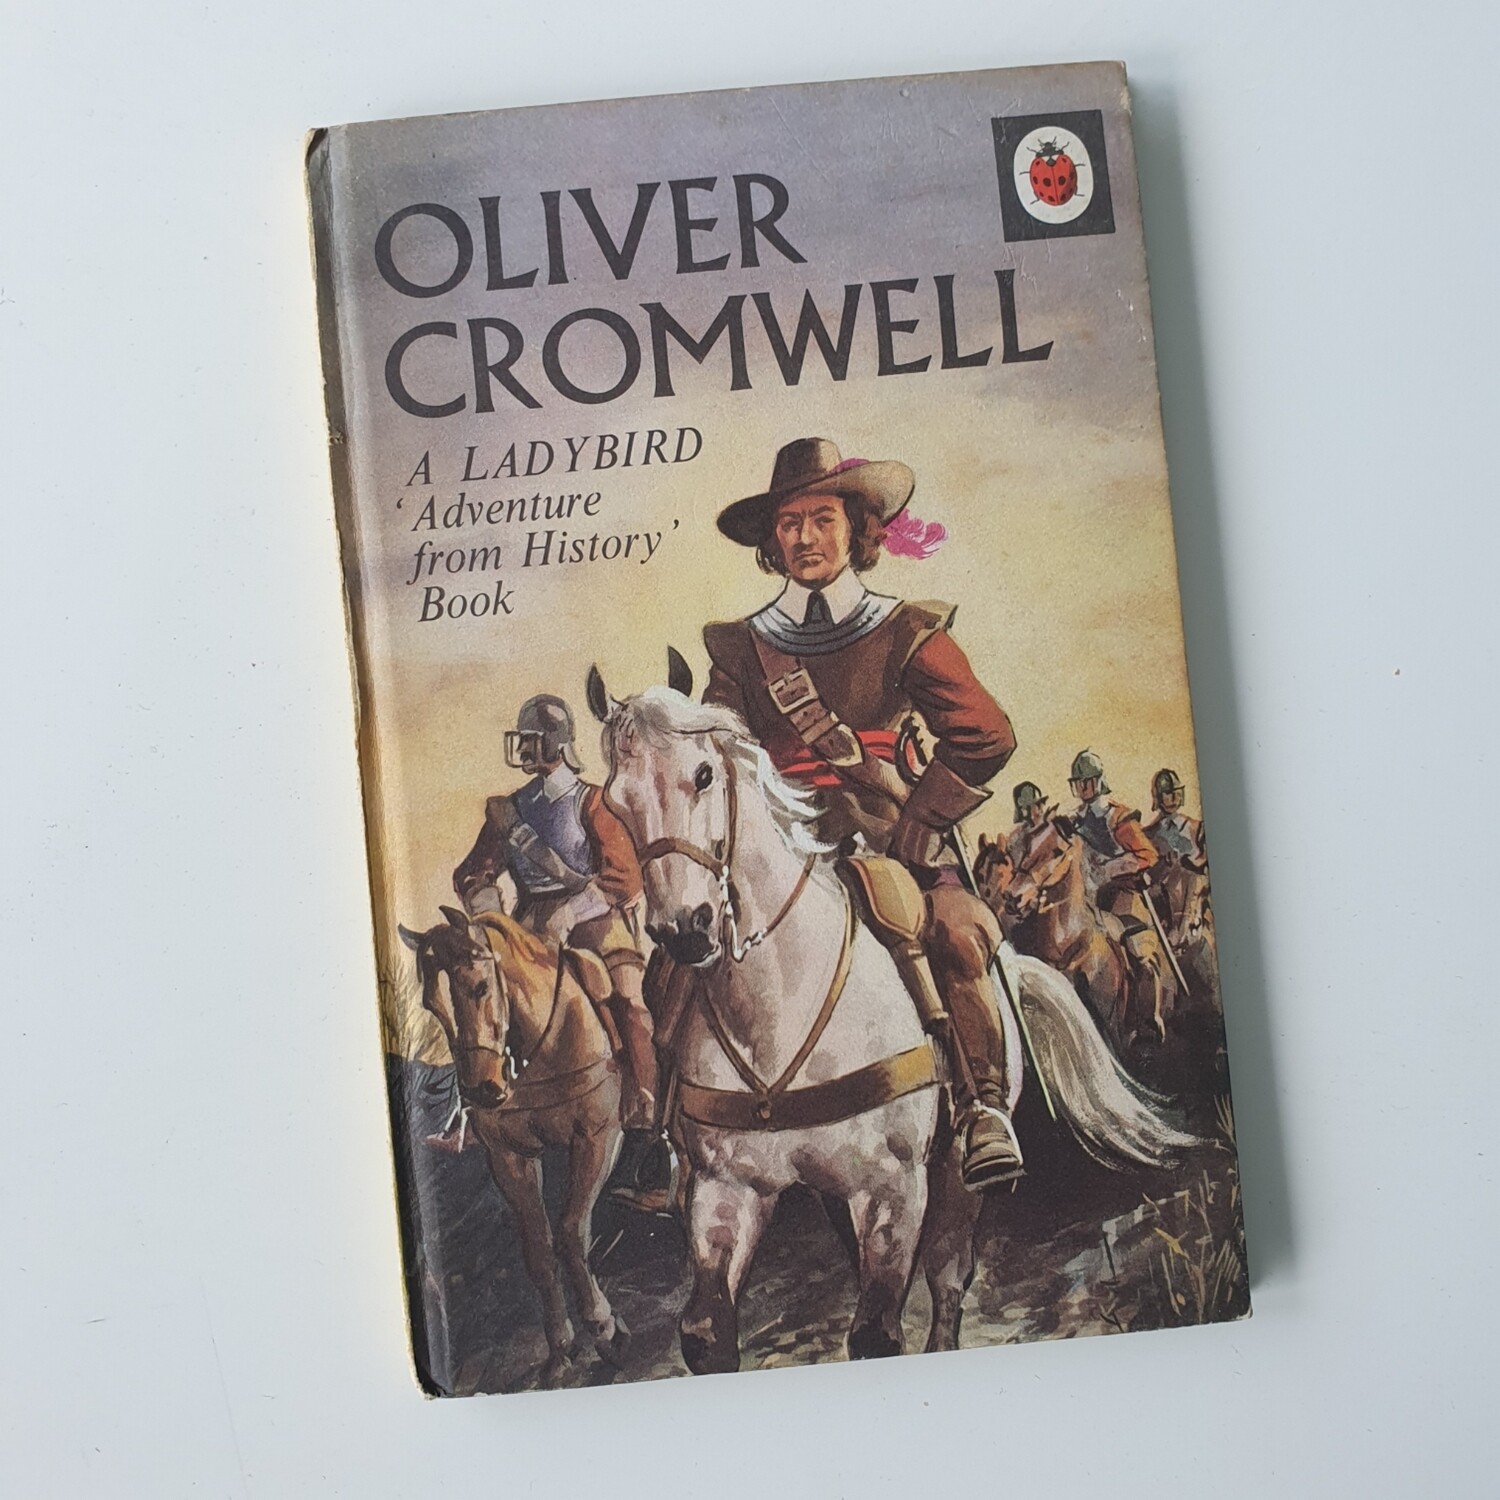 Oliver Cromwell  - Ladybird book